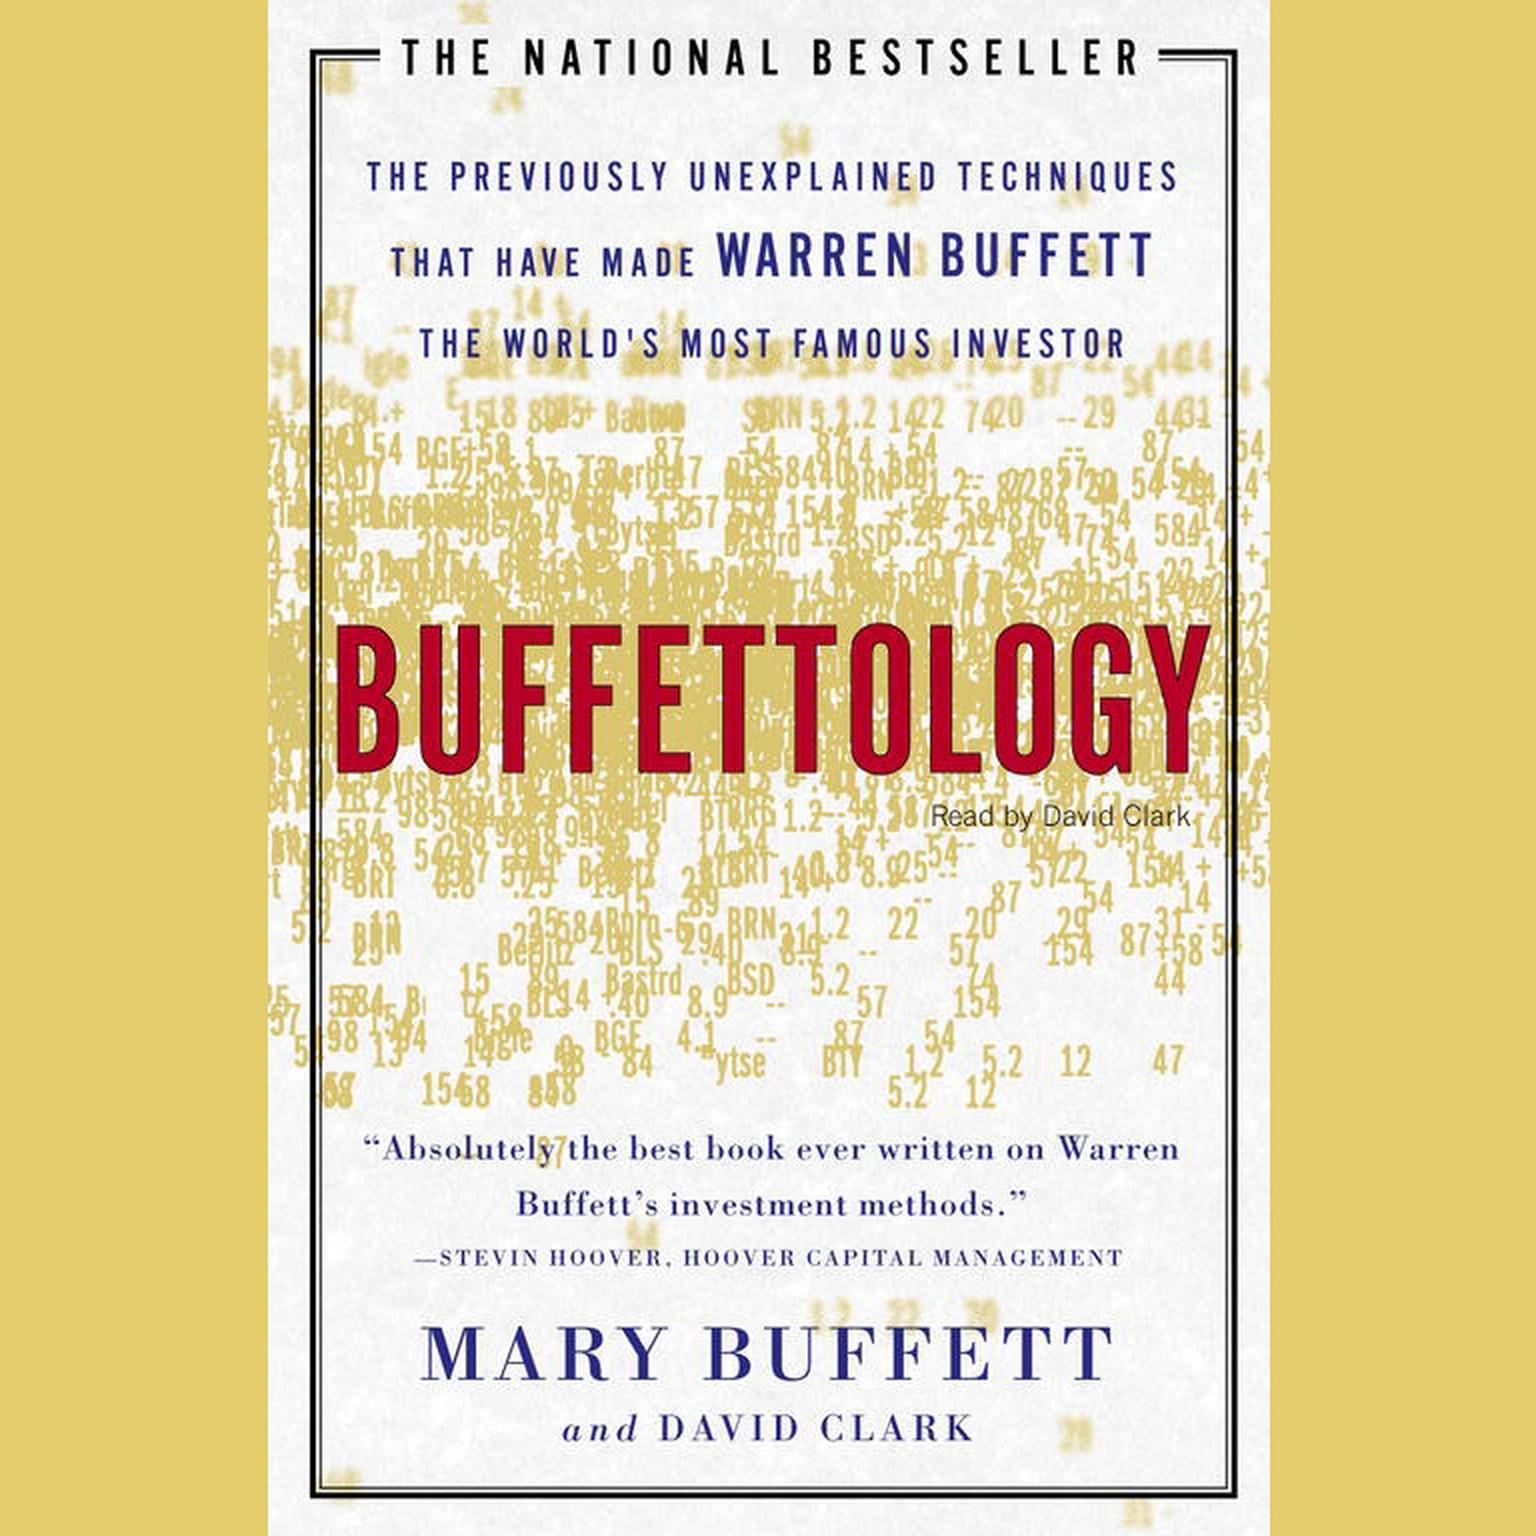 Buffettology (Abridged): The Previously Unexplained Techniques That Have Made Warren Buffett the Worlds Most Famous Investor Audiobook, by Mary Buffett